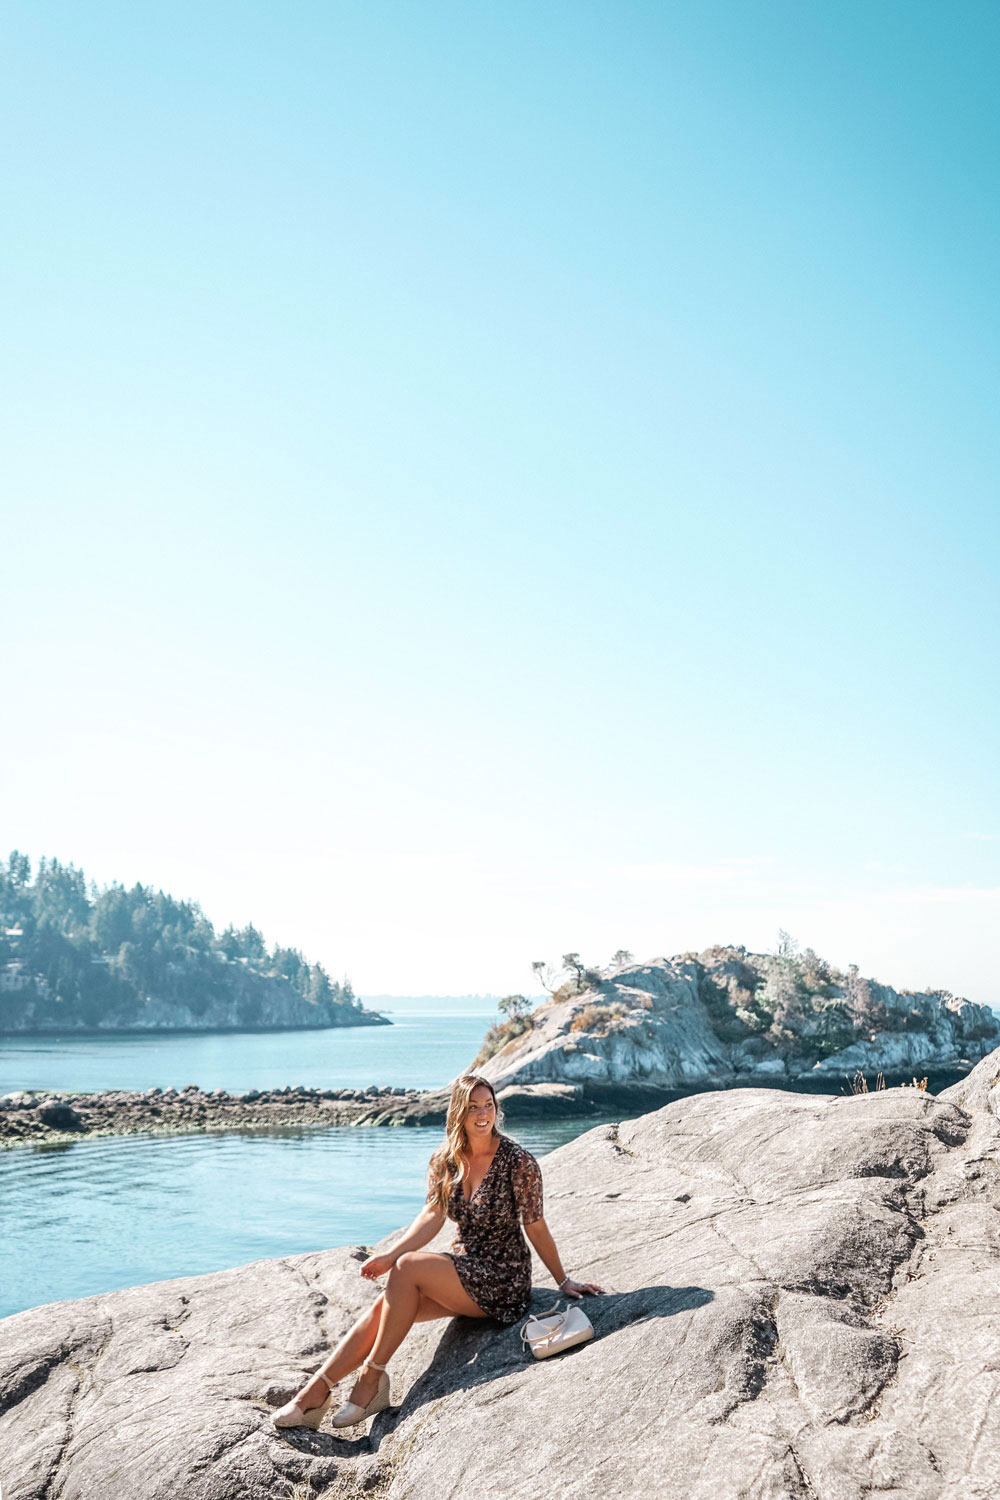 whytecliff park vancouver by To Vogue or Bust